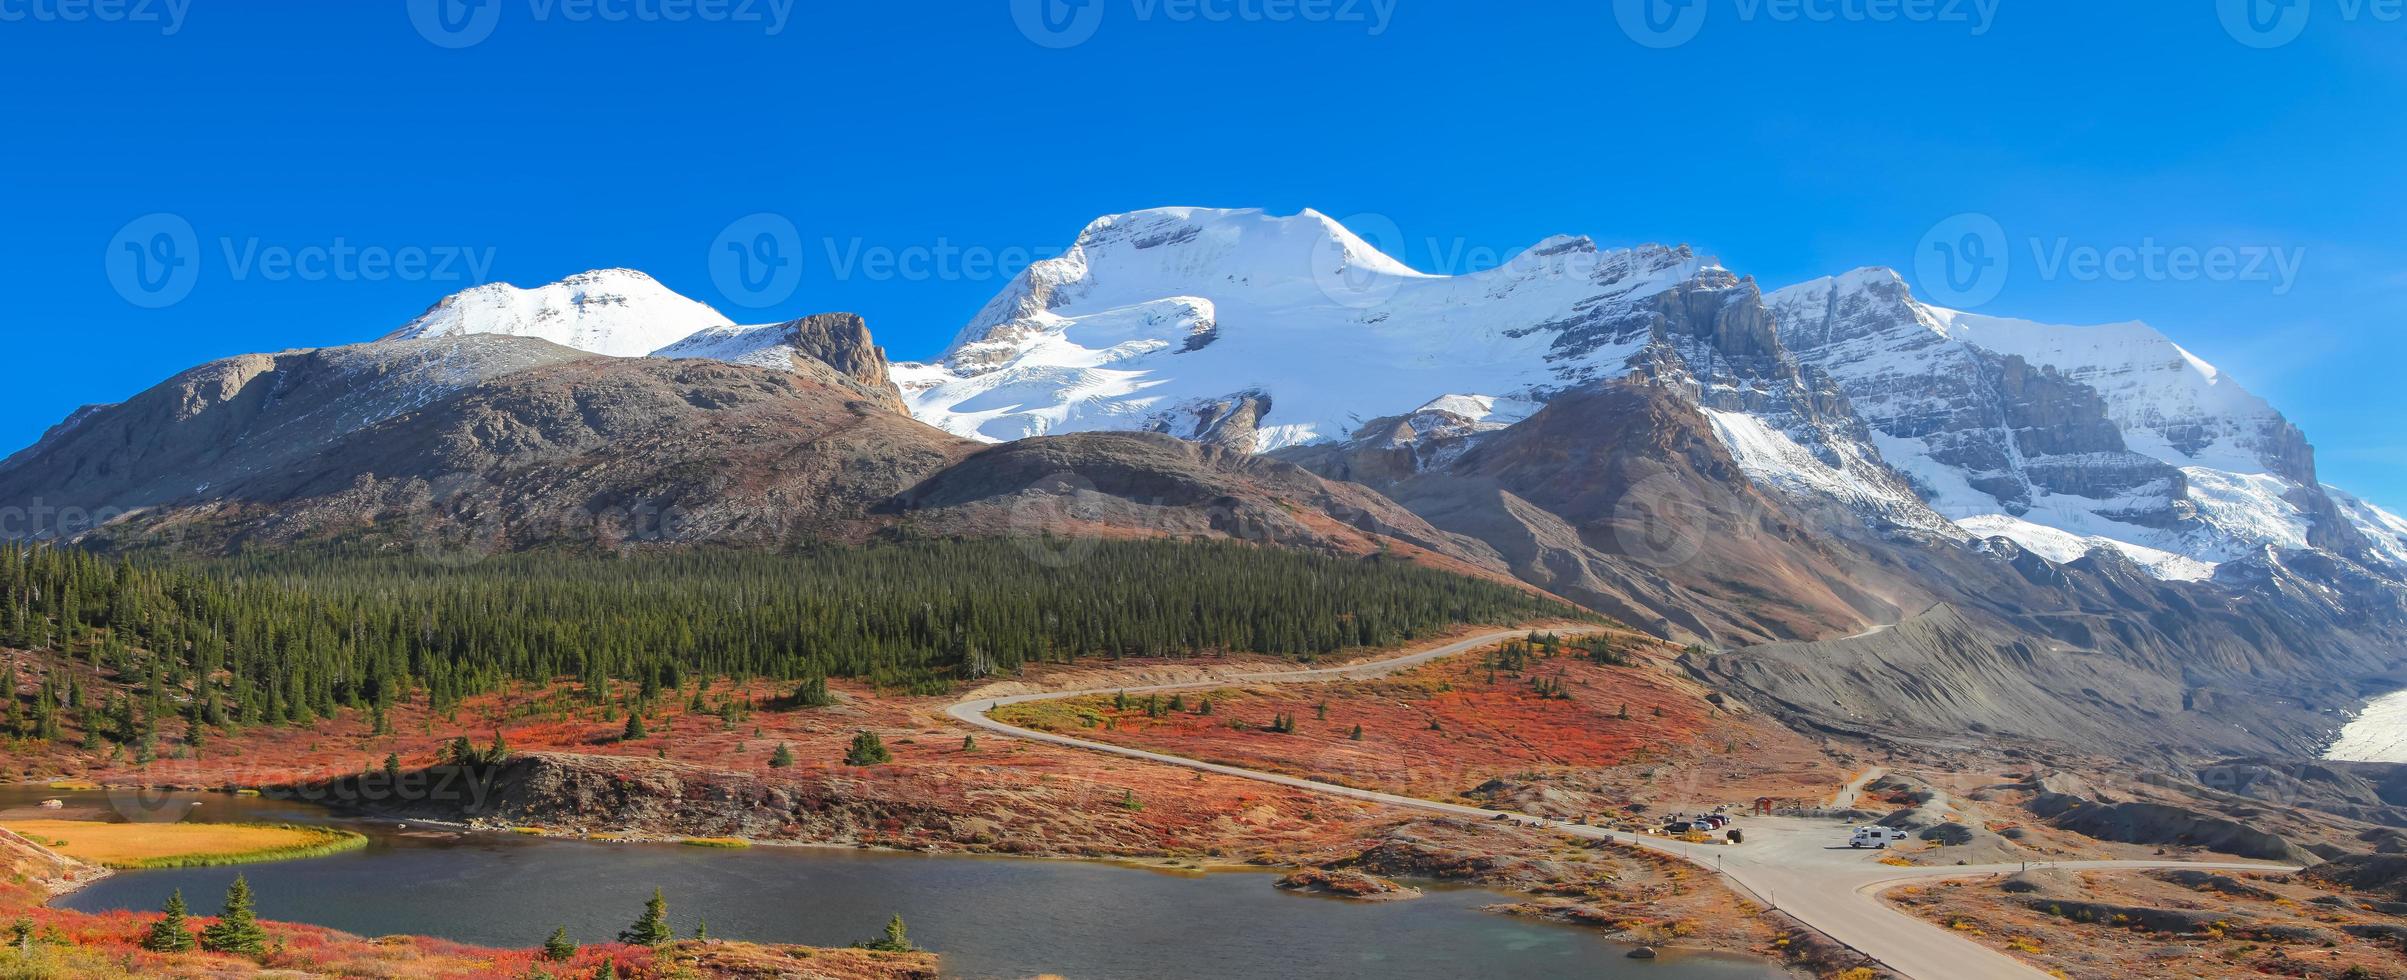 Mont Athabasca landscape at Icefields parkway in Banff national park, Canada. photo